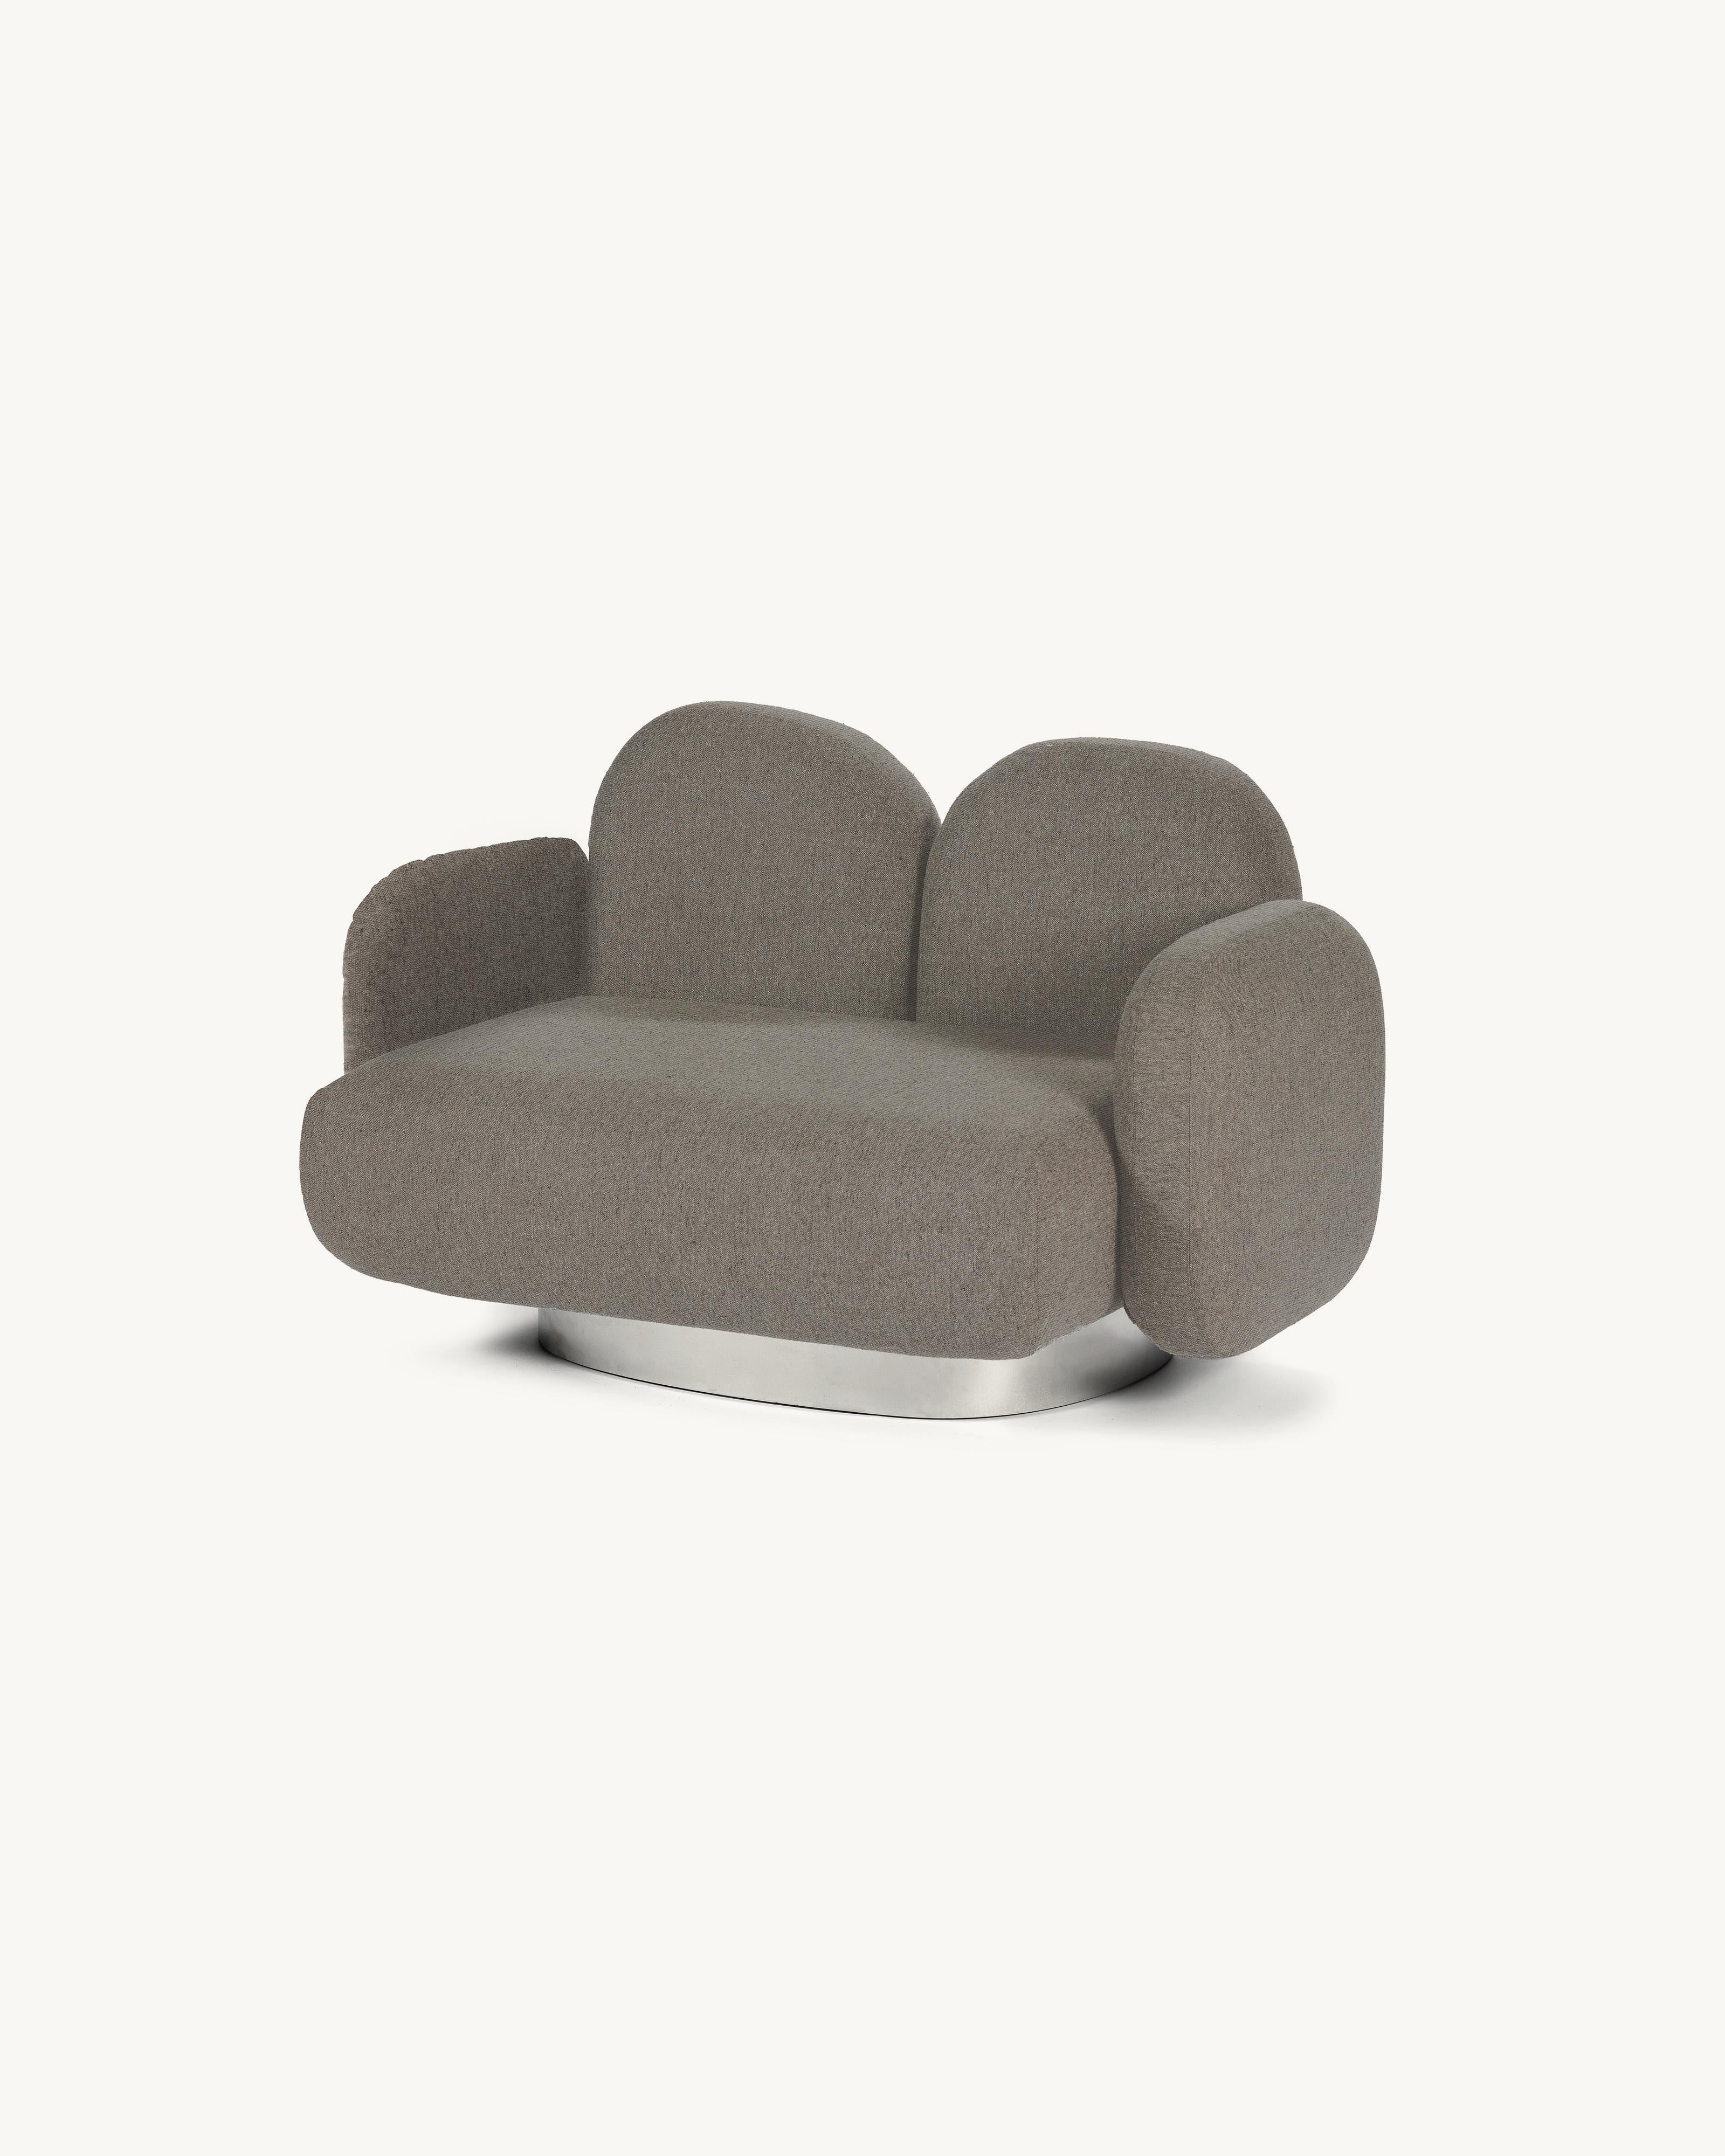 Contemporary Sofa 'Assemble' by Destroyers/Builders, 1 seater + 2 armrests For Sale 9